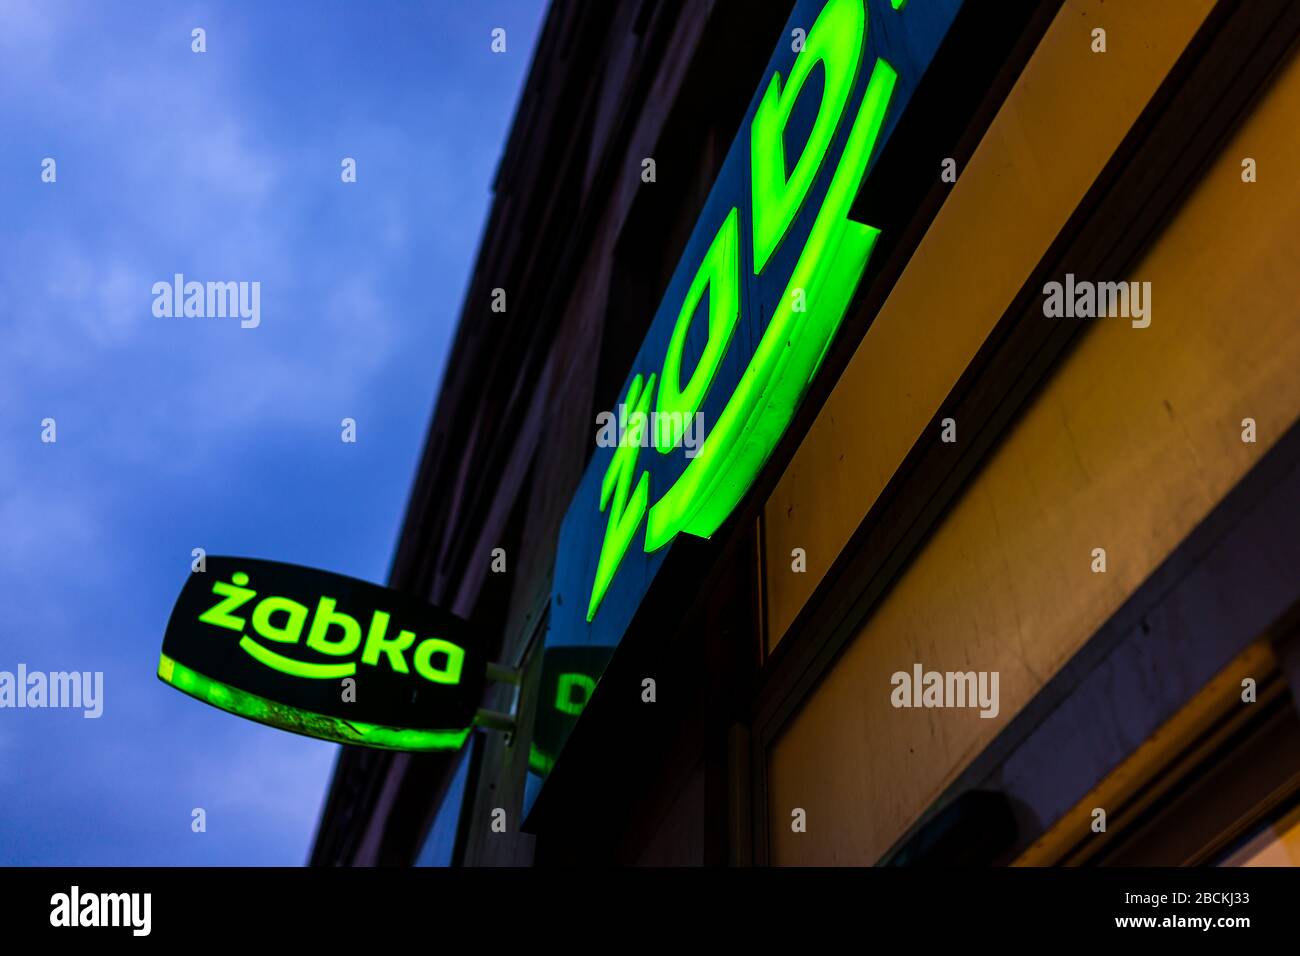 Warsaw, Poland - January 22, 2019: Sign closeup for Zabka green grocery supermarket convenience store on street in downtown center at night with blue Stock Photo